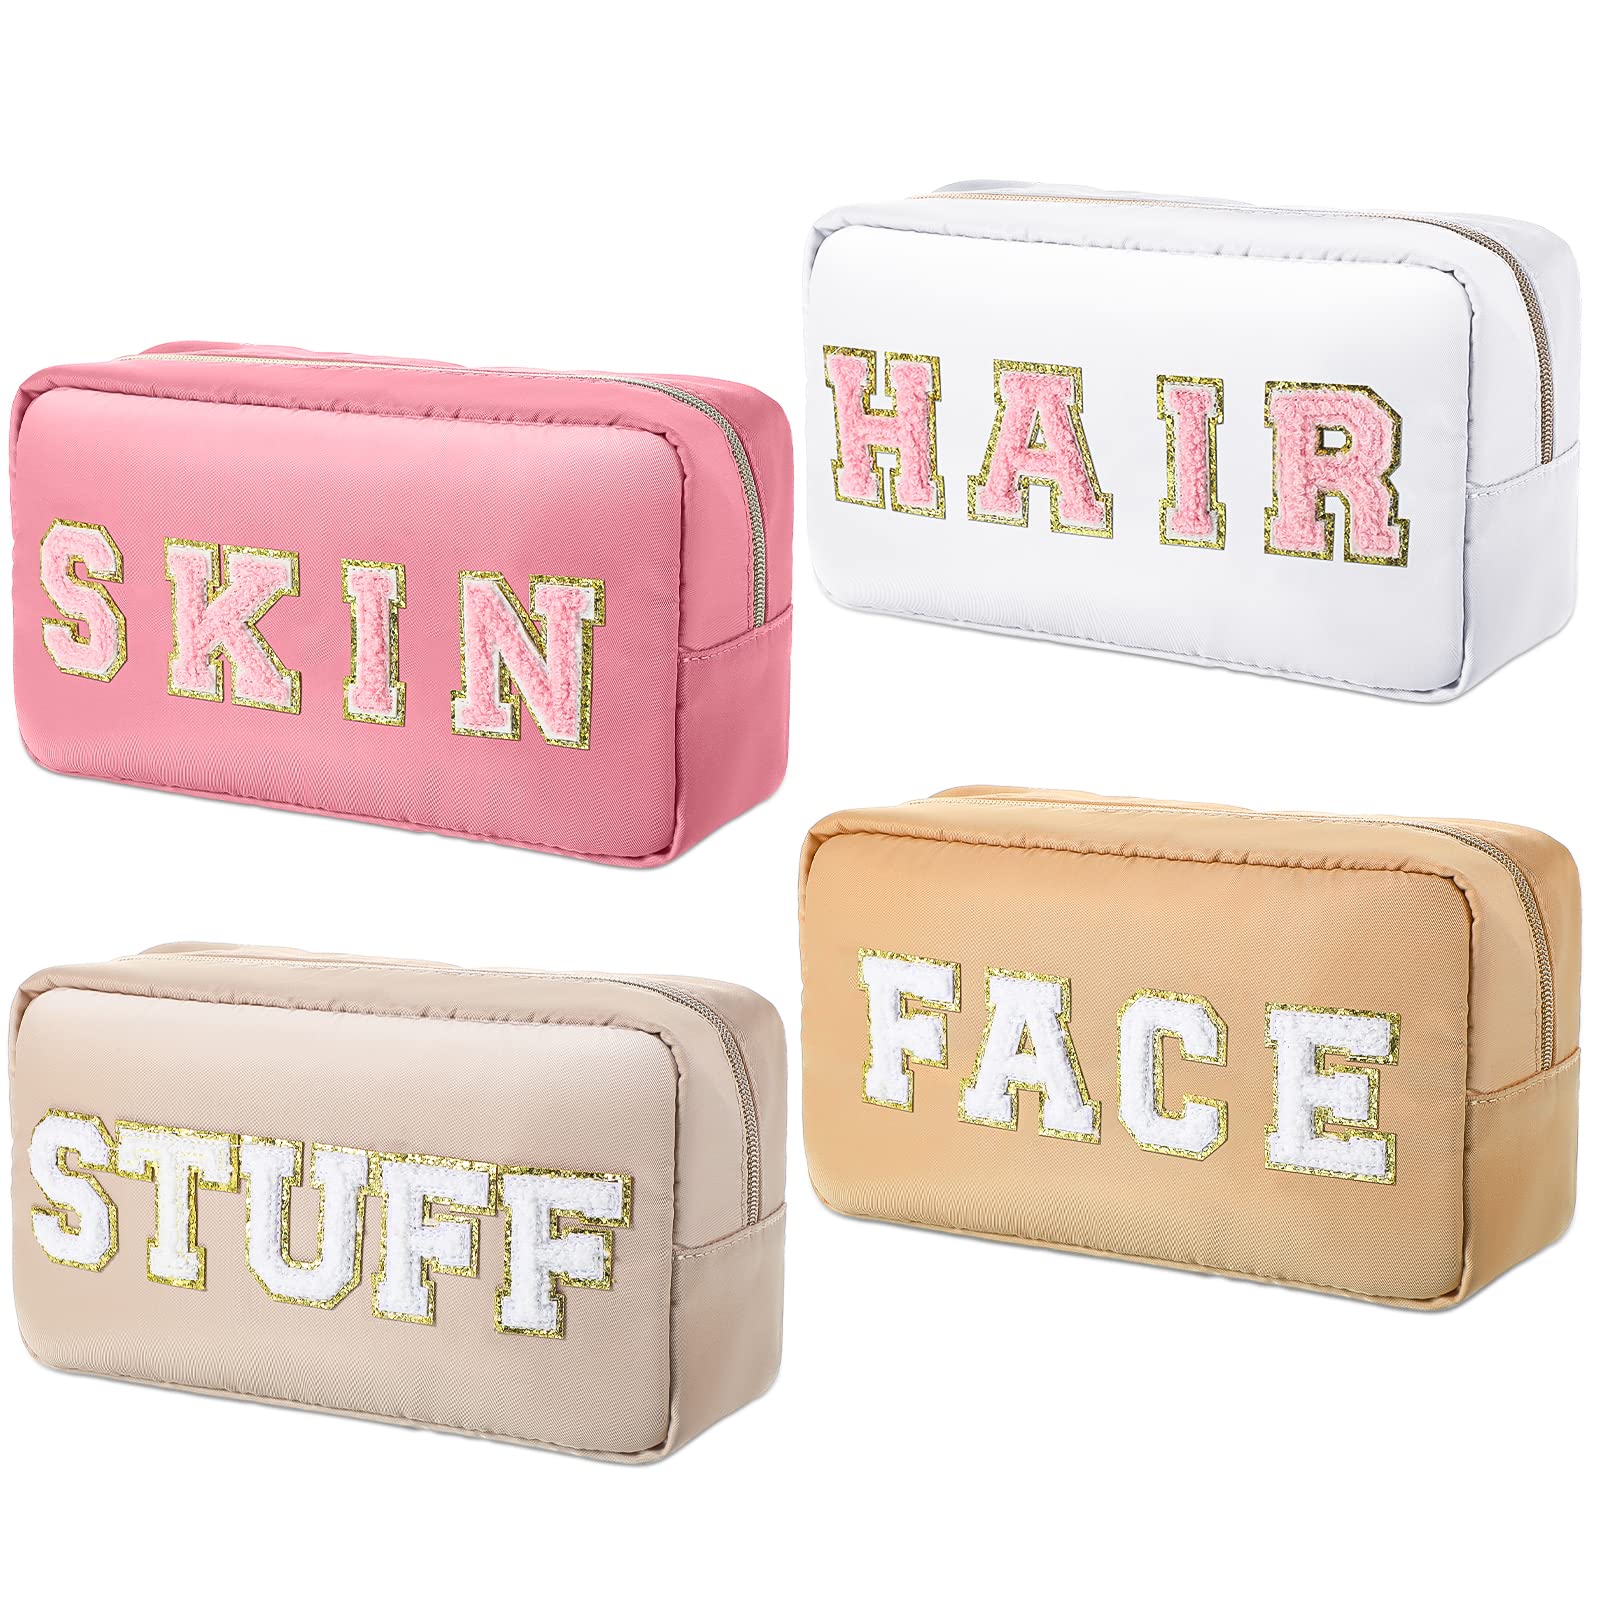 Remerry 4 Pcs Nylon Cosmetic Bag Chenille Letter Cosmetic Pouch Zipper Preppy Makeup Bag Waterproof Hair Bag with Patches Makeup Organizer Bag Set for Women (Earth Tone, Stuff, Face)